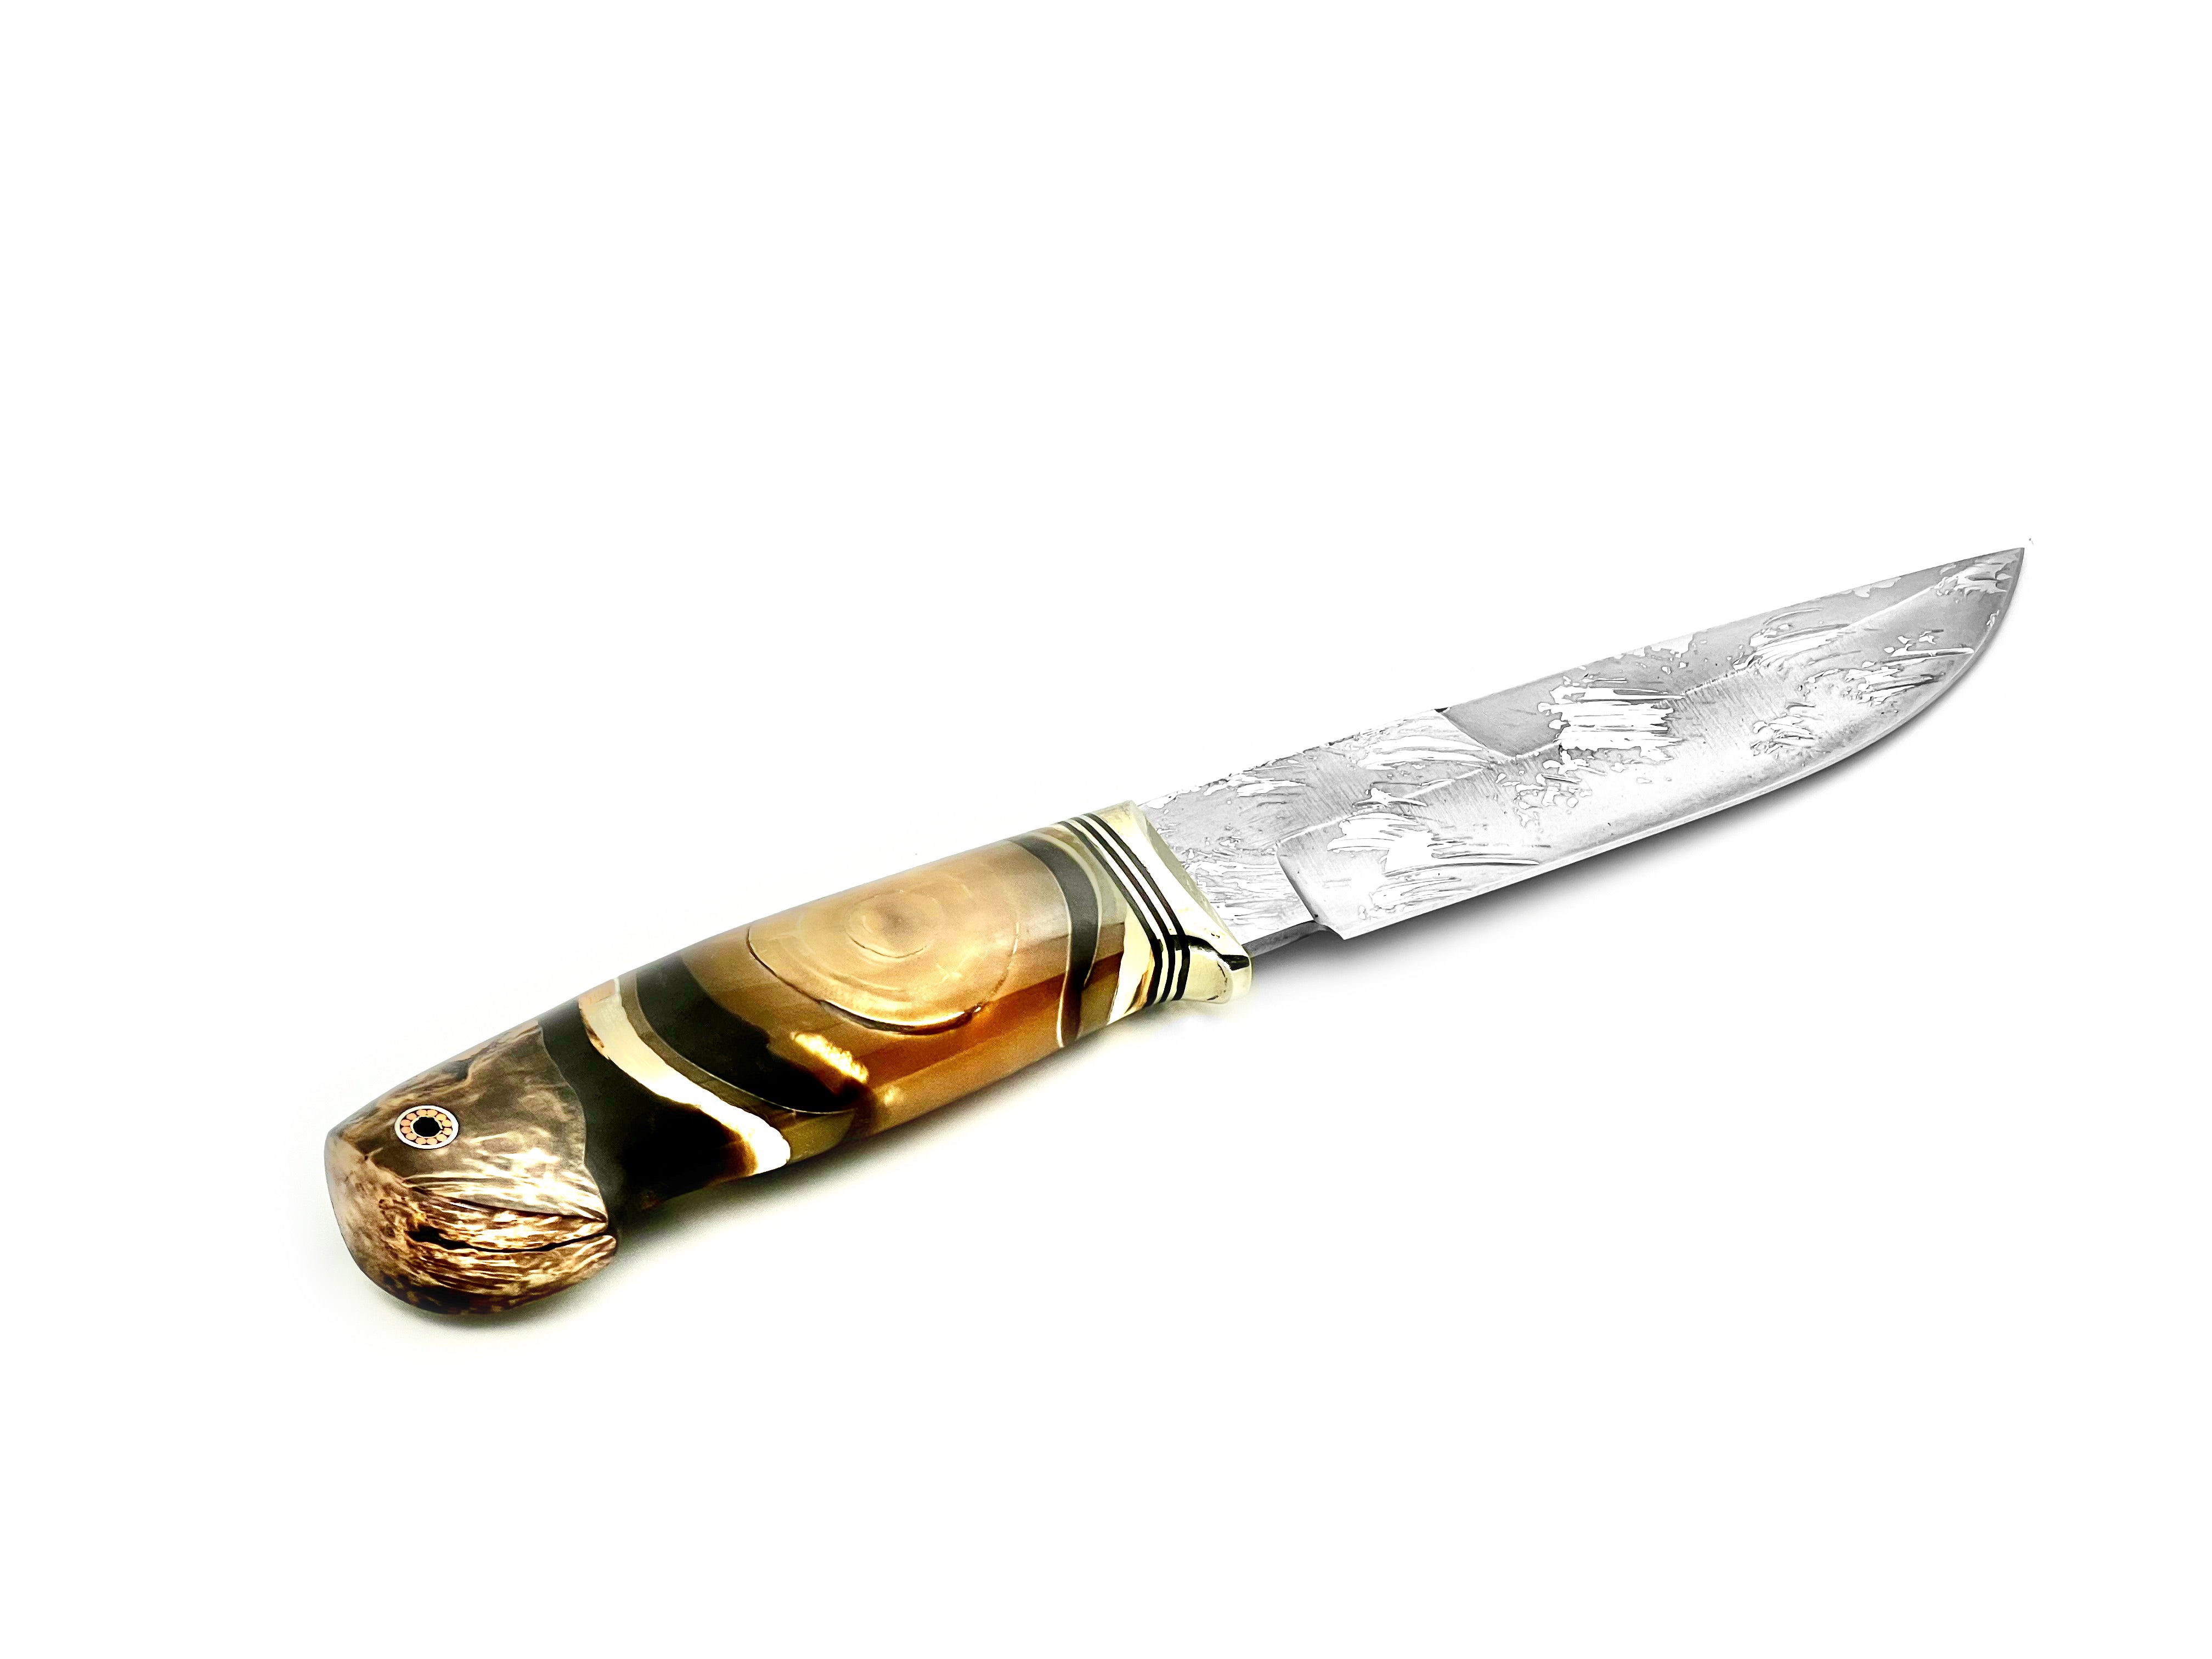 CPM® REX® 121 Steel Hunting Knife with Mammoth Tusk